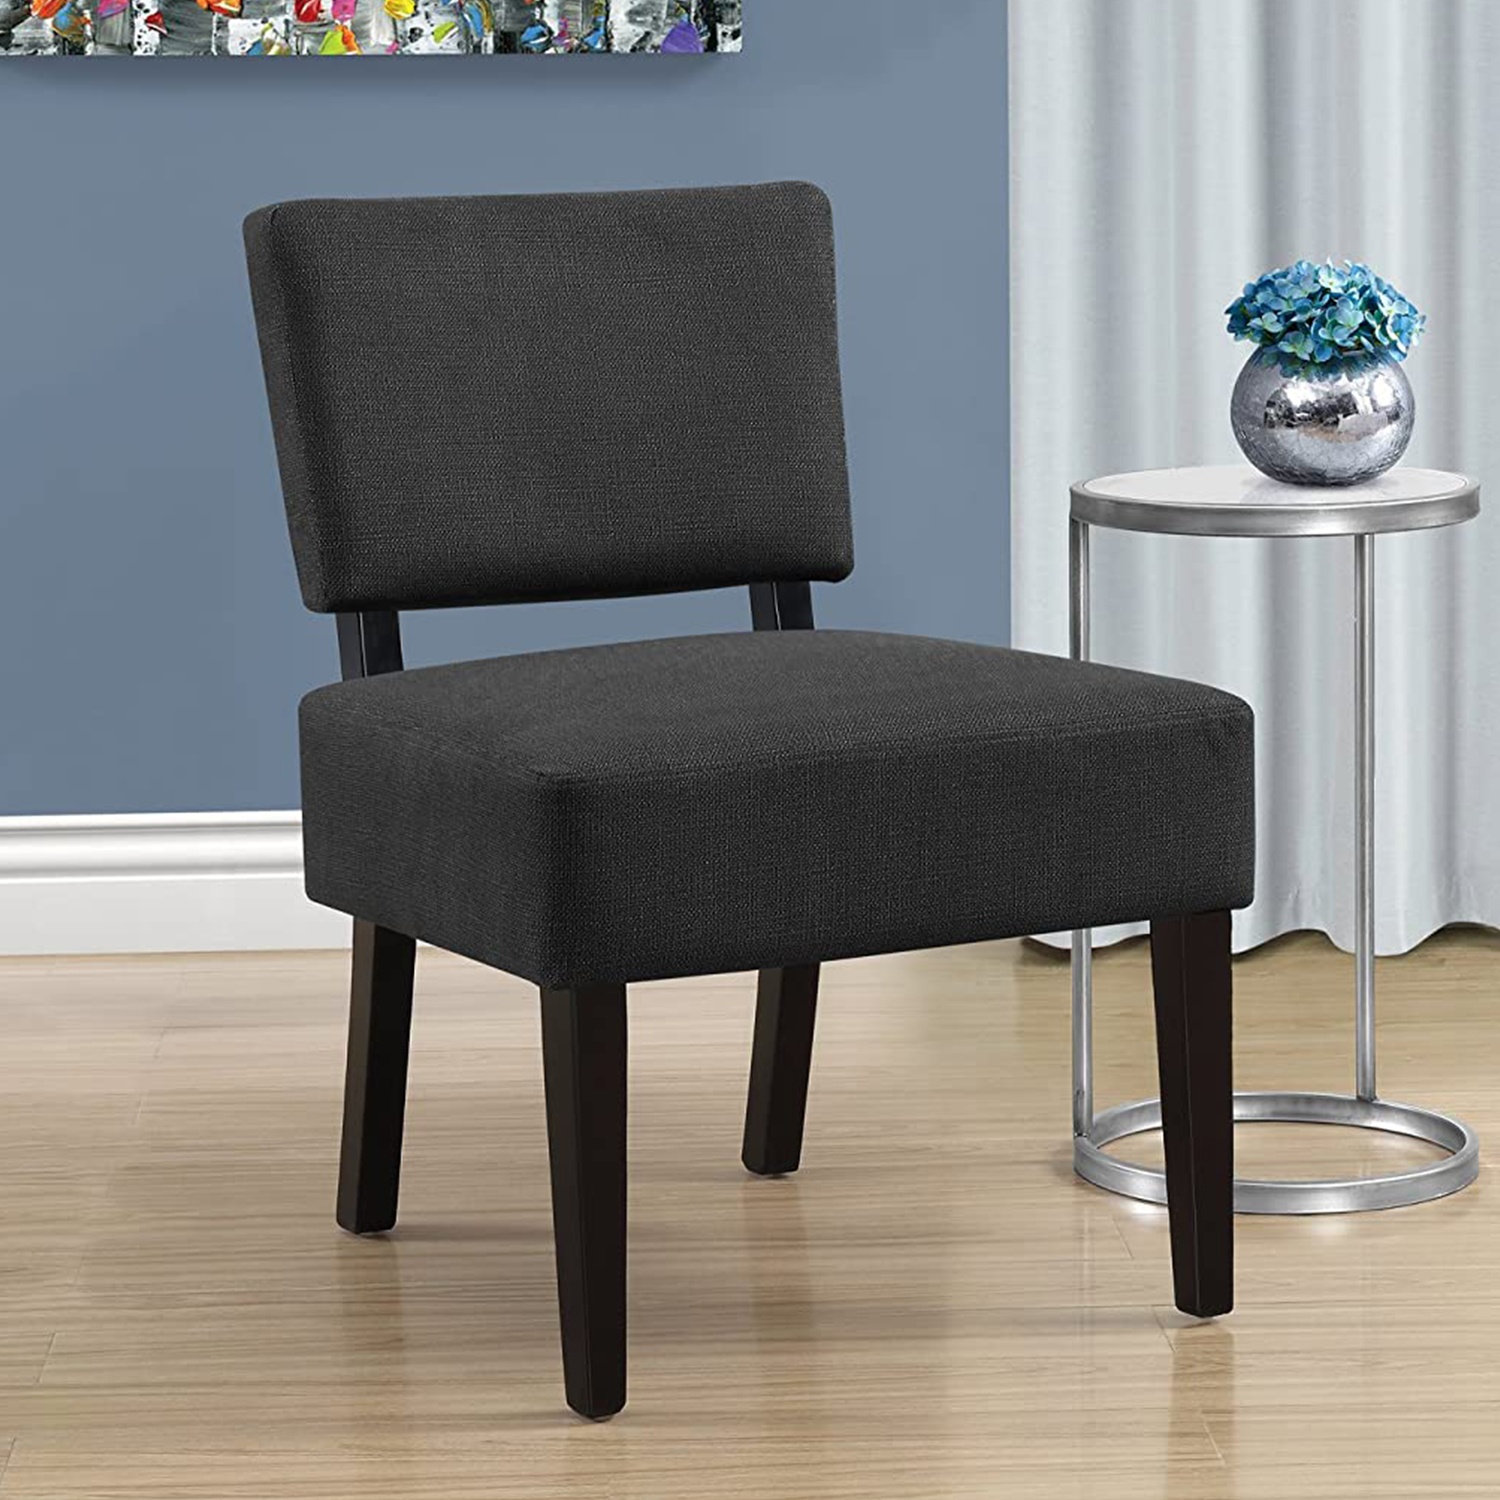 27.5" x 22.75" x 31.5" Dark Grey Foam Accent Chair with Solid Wood Frame